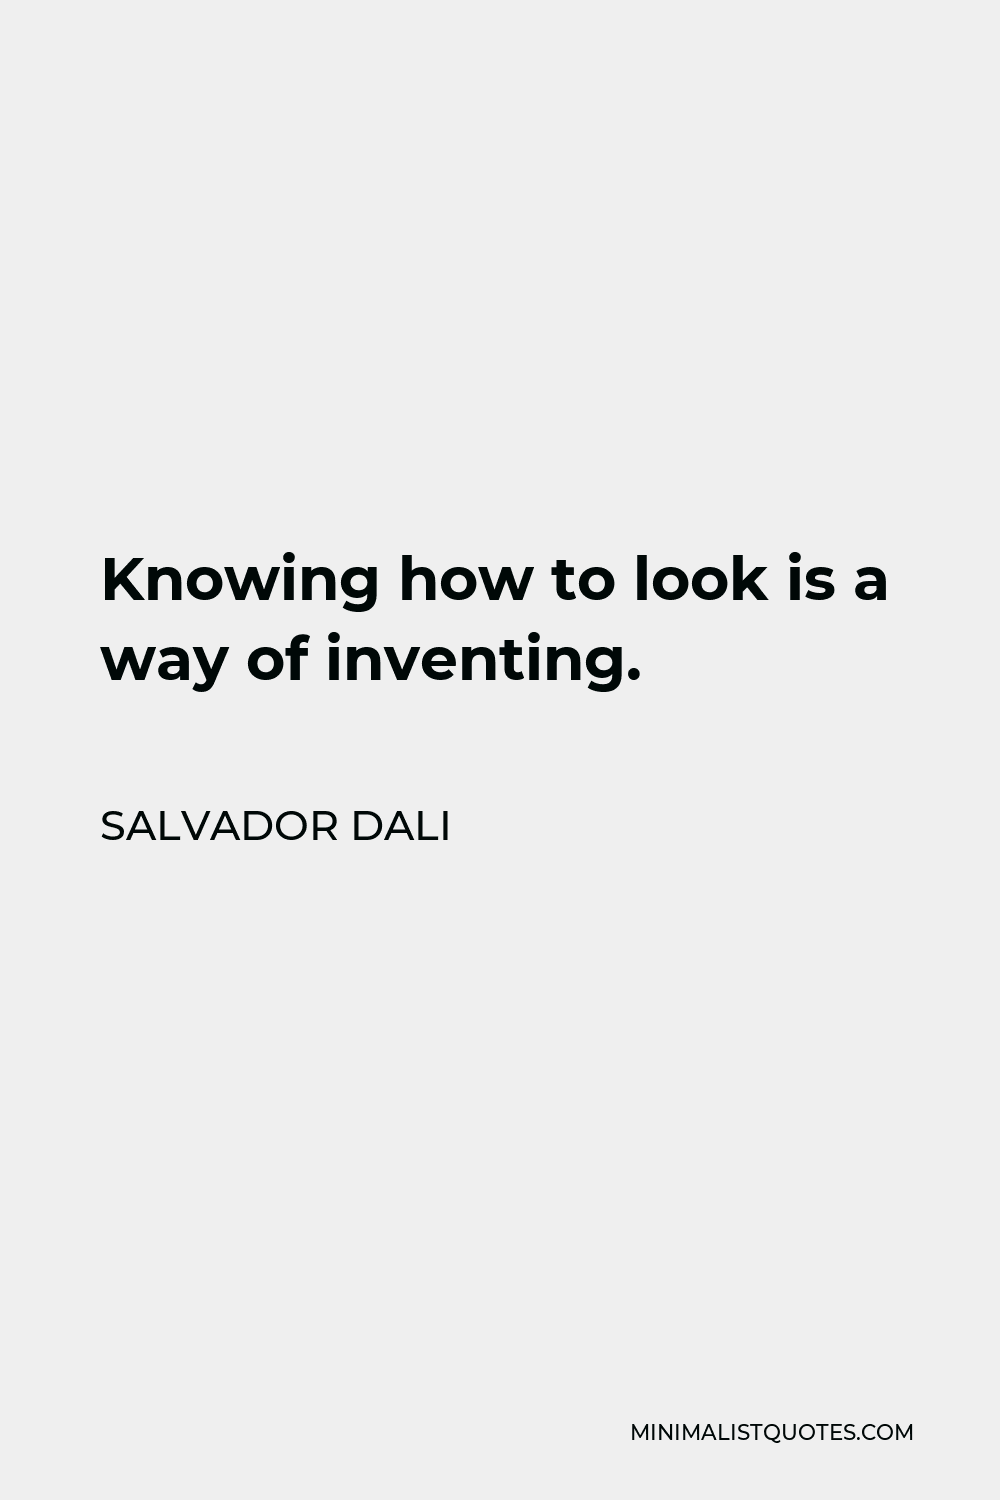 Salvador Dali Quote - Knowing how to look is a way of inventing.